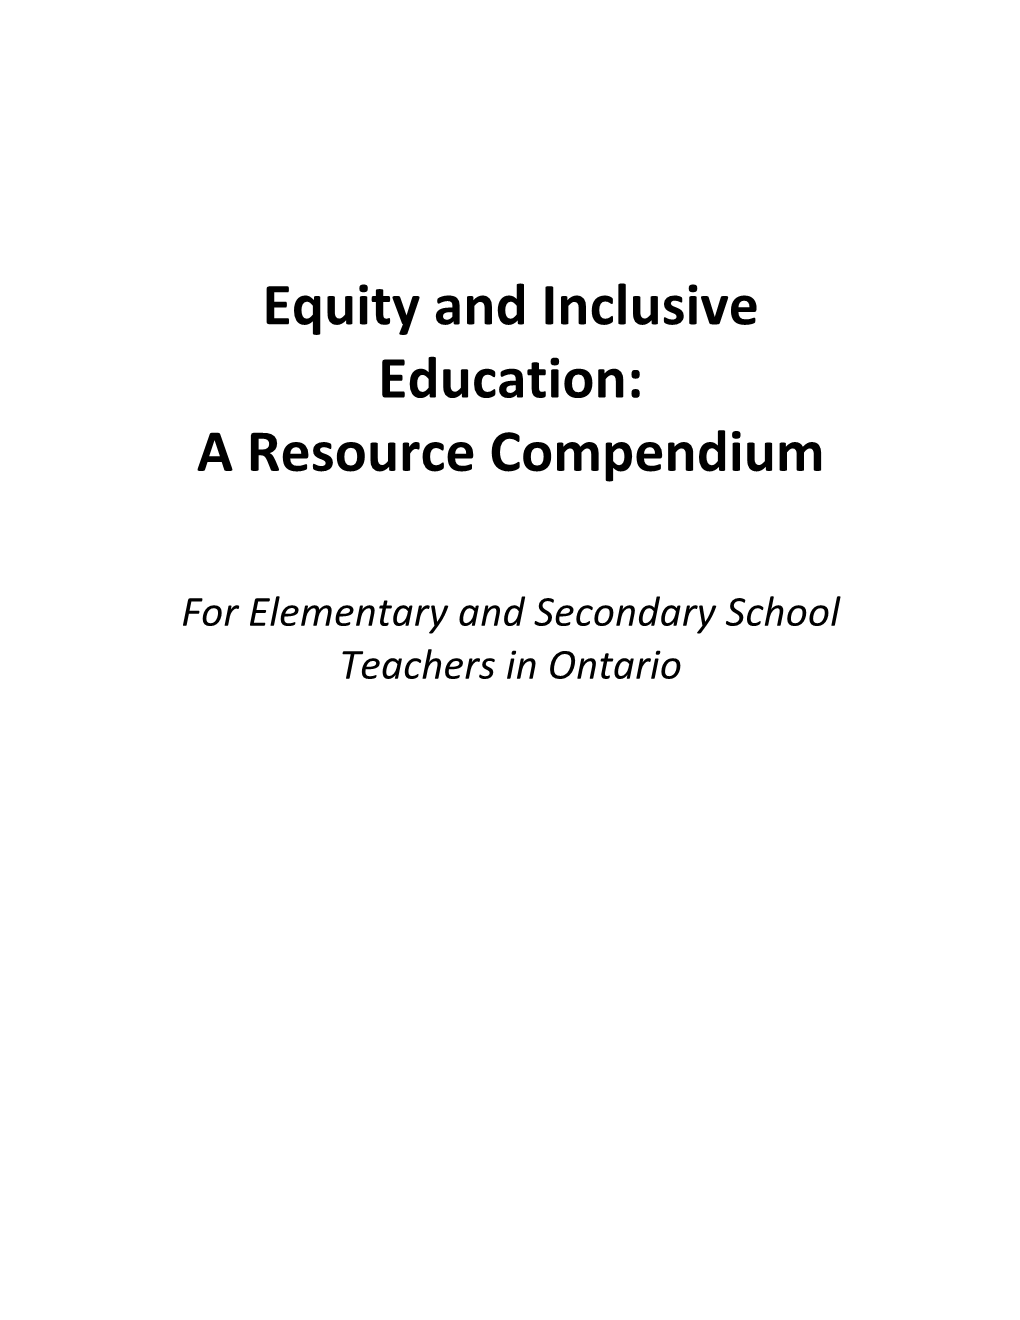 Equity and Inclusive Education: a Resource Compendium